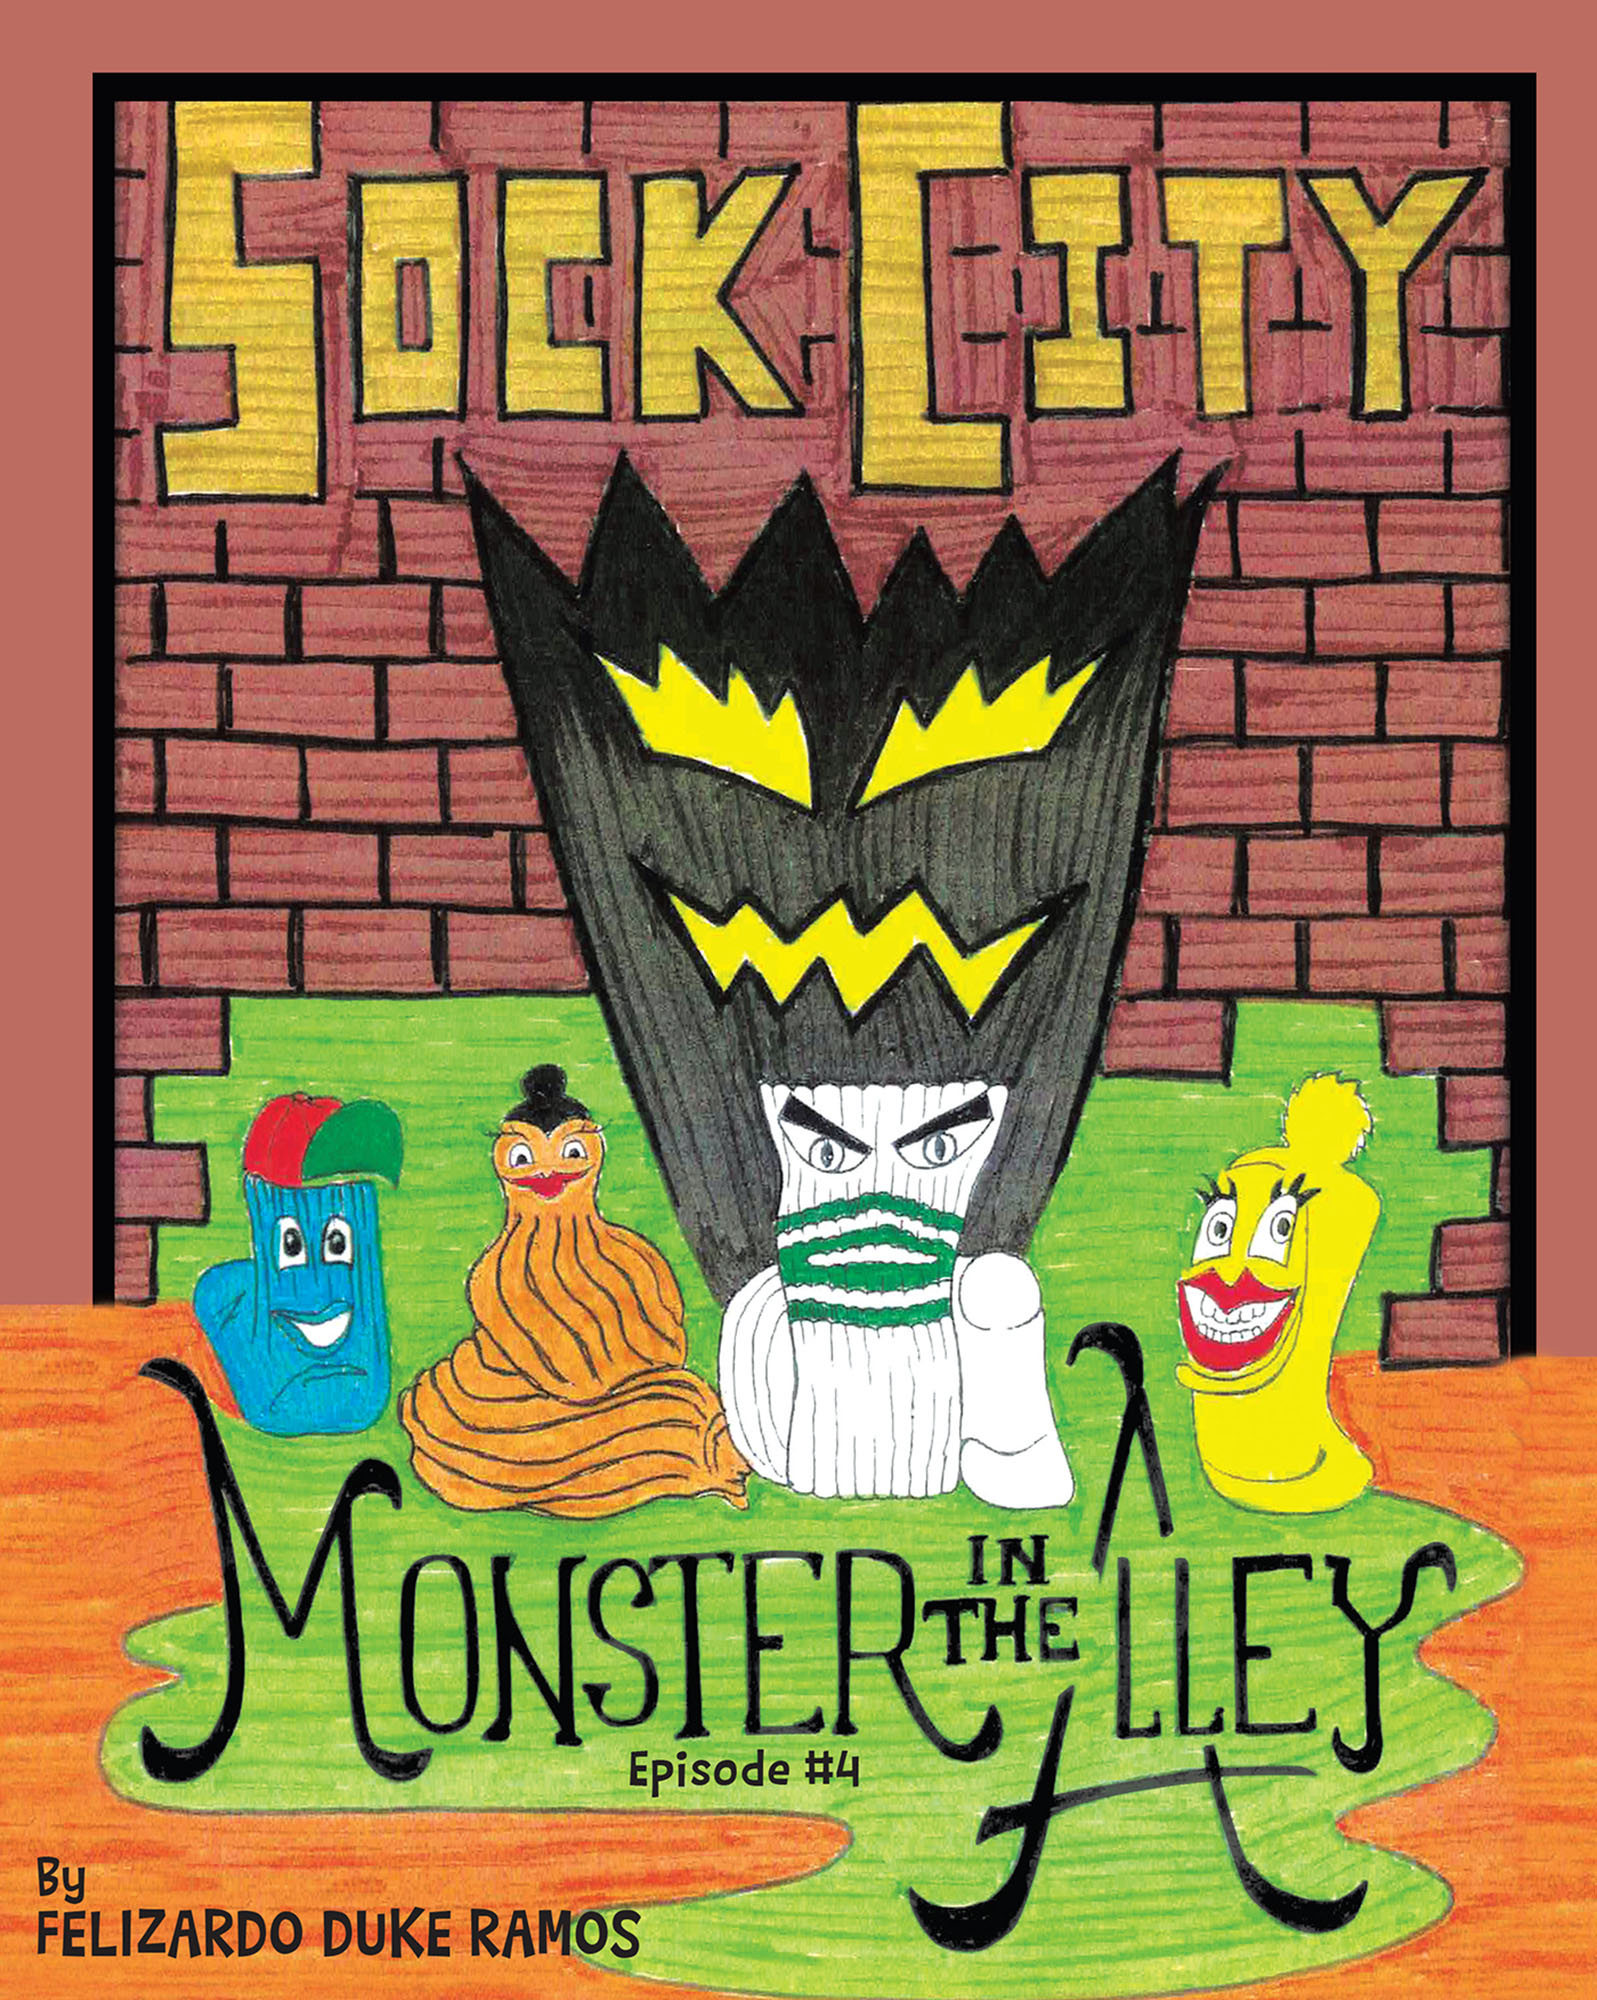 Sock City Monster in the Alley Cover Image